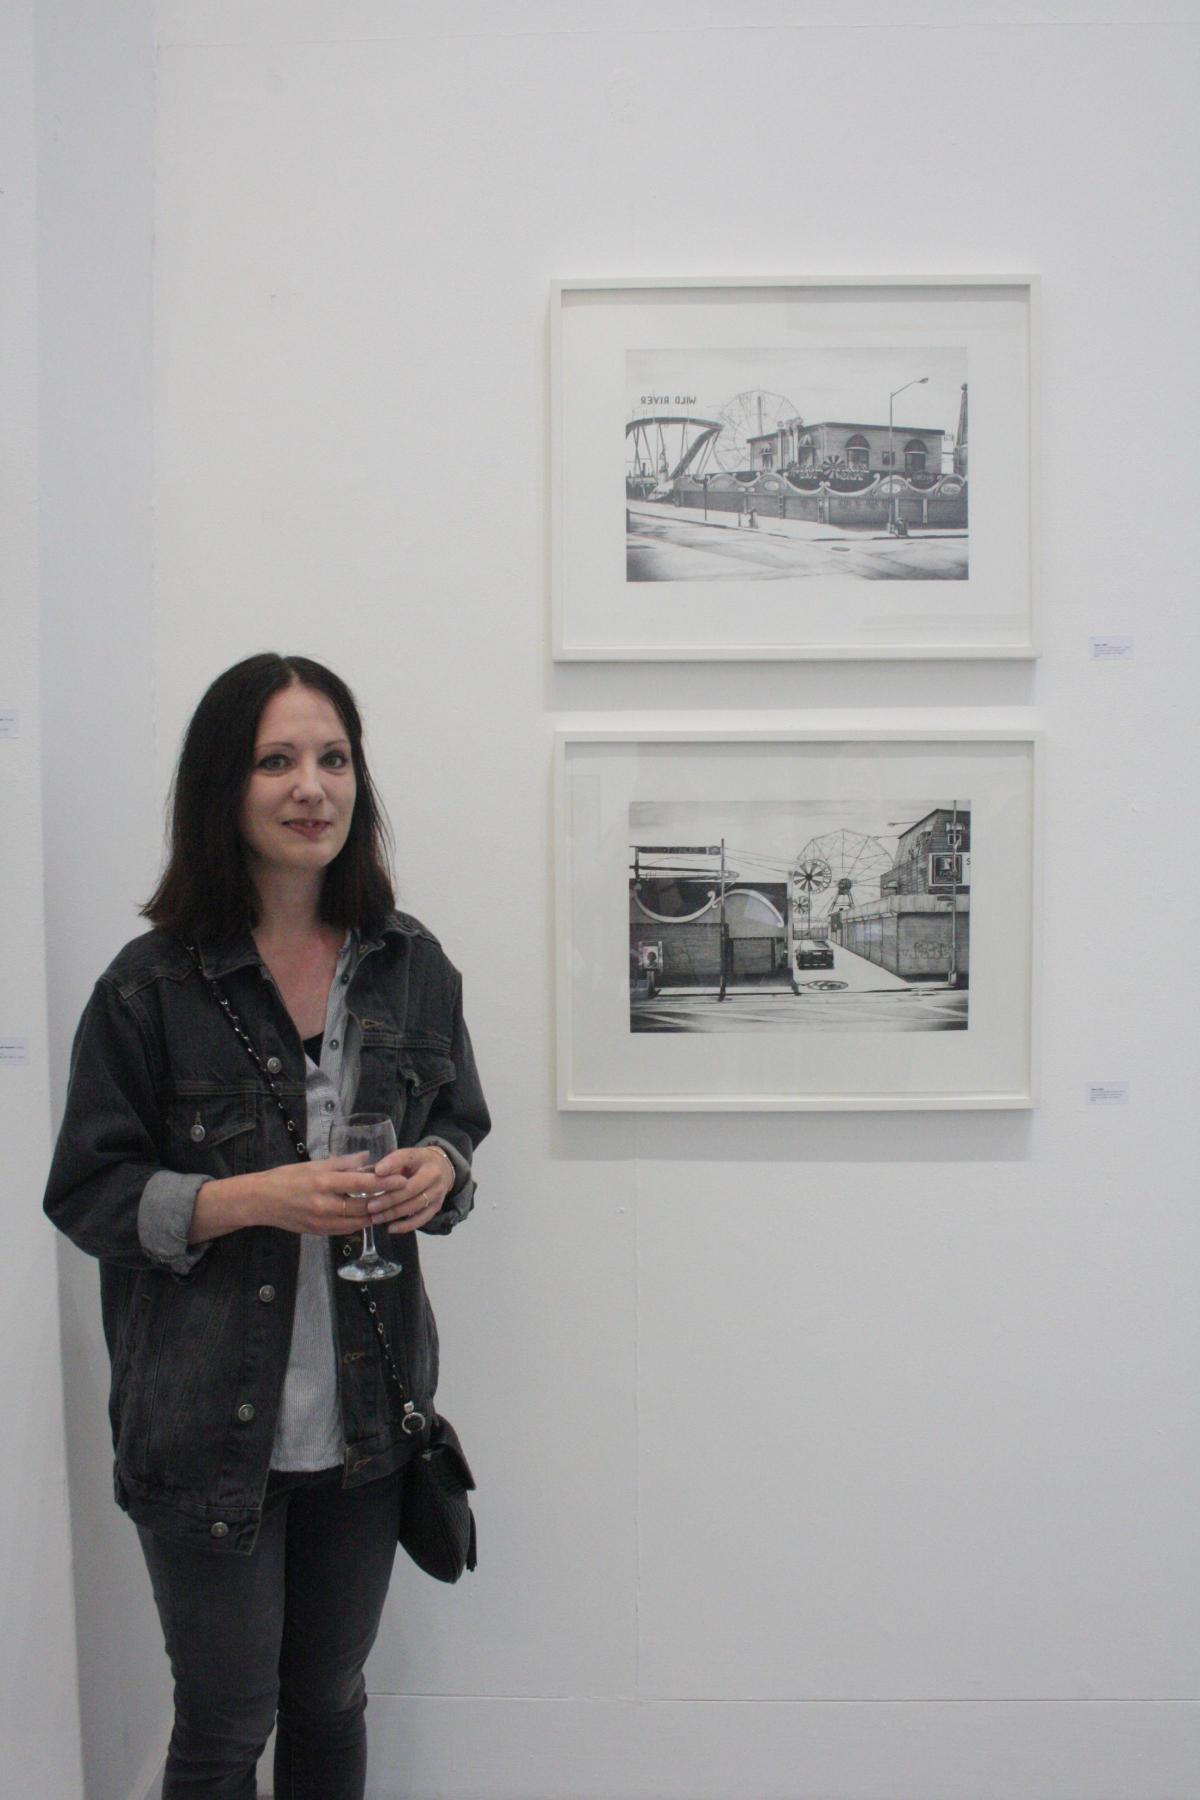 Alison Griffin and her winning work for the artsdepot open prize